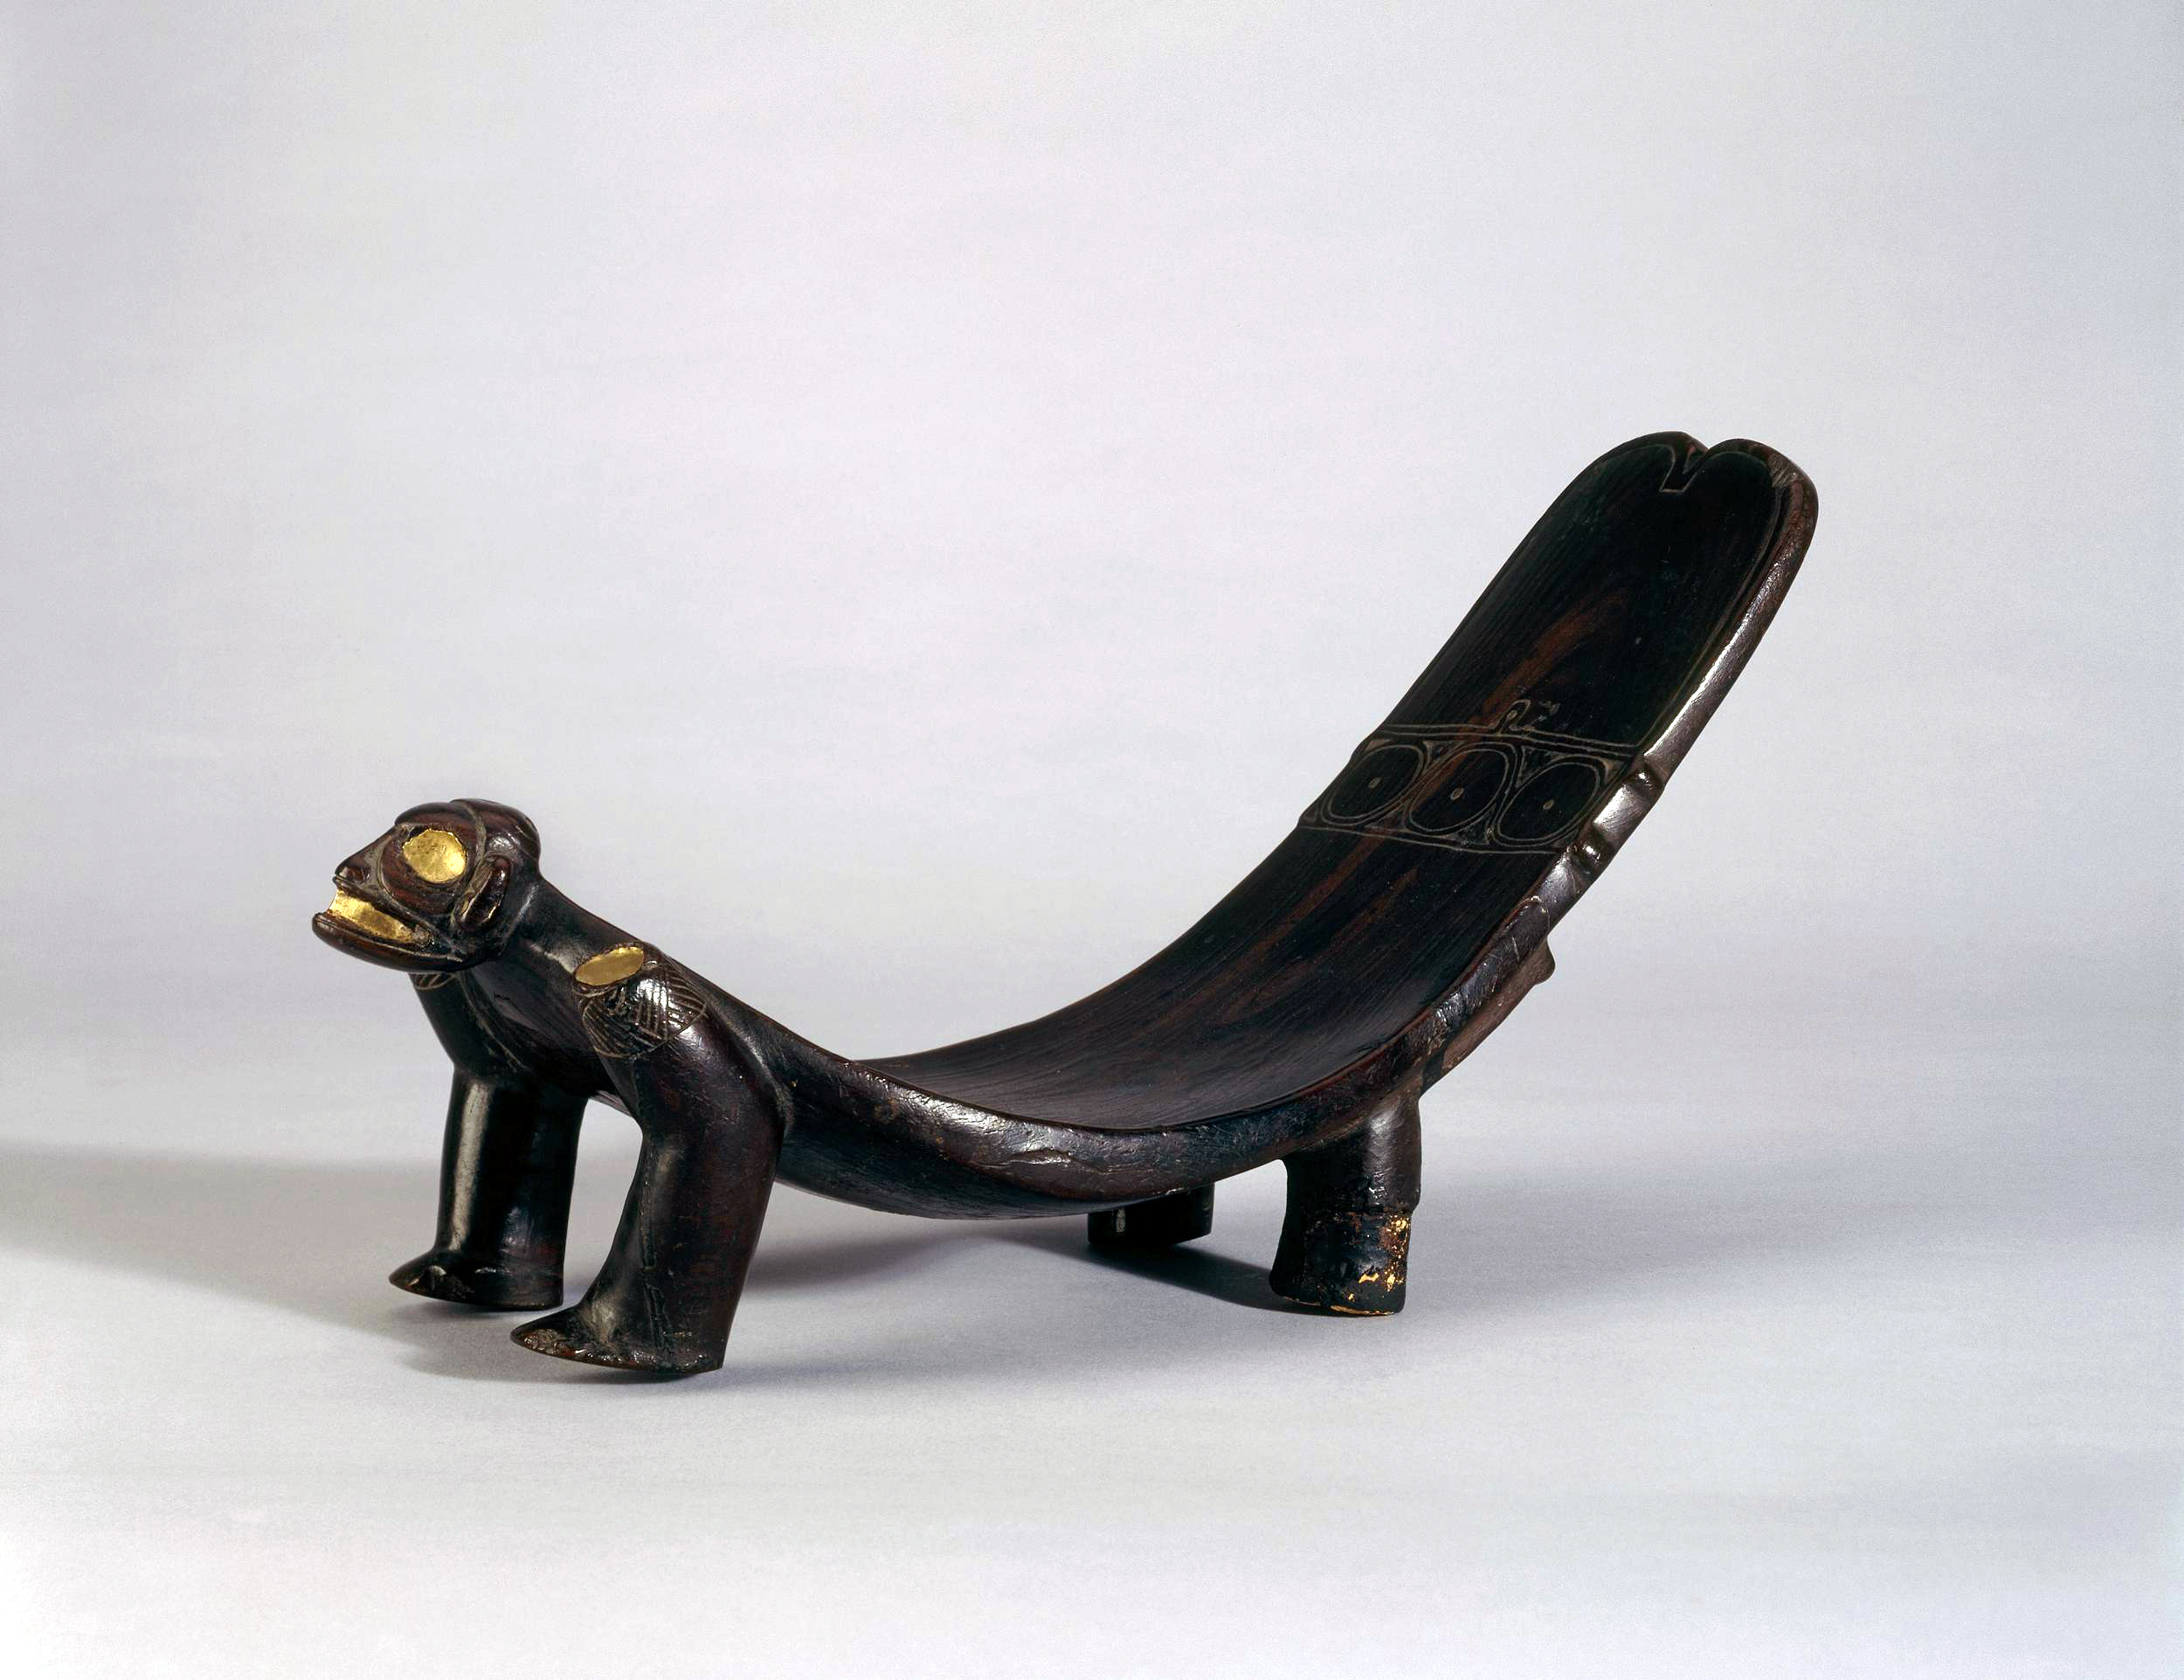 Taíno artist, Ritual seat (duho), 1292-1399, wood inlaid with gold, 22 x 44 x 16.5 cm (The British Museum)